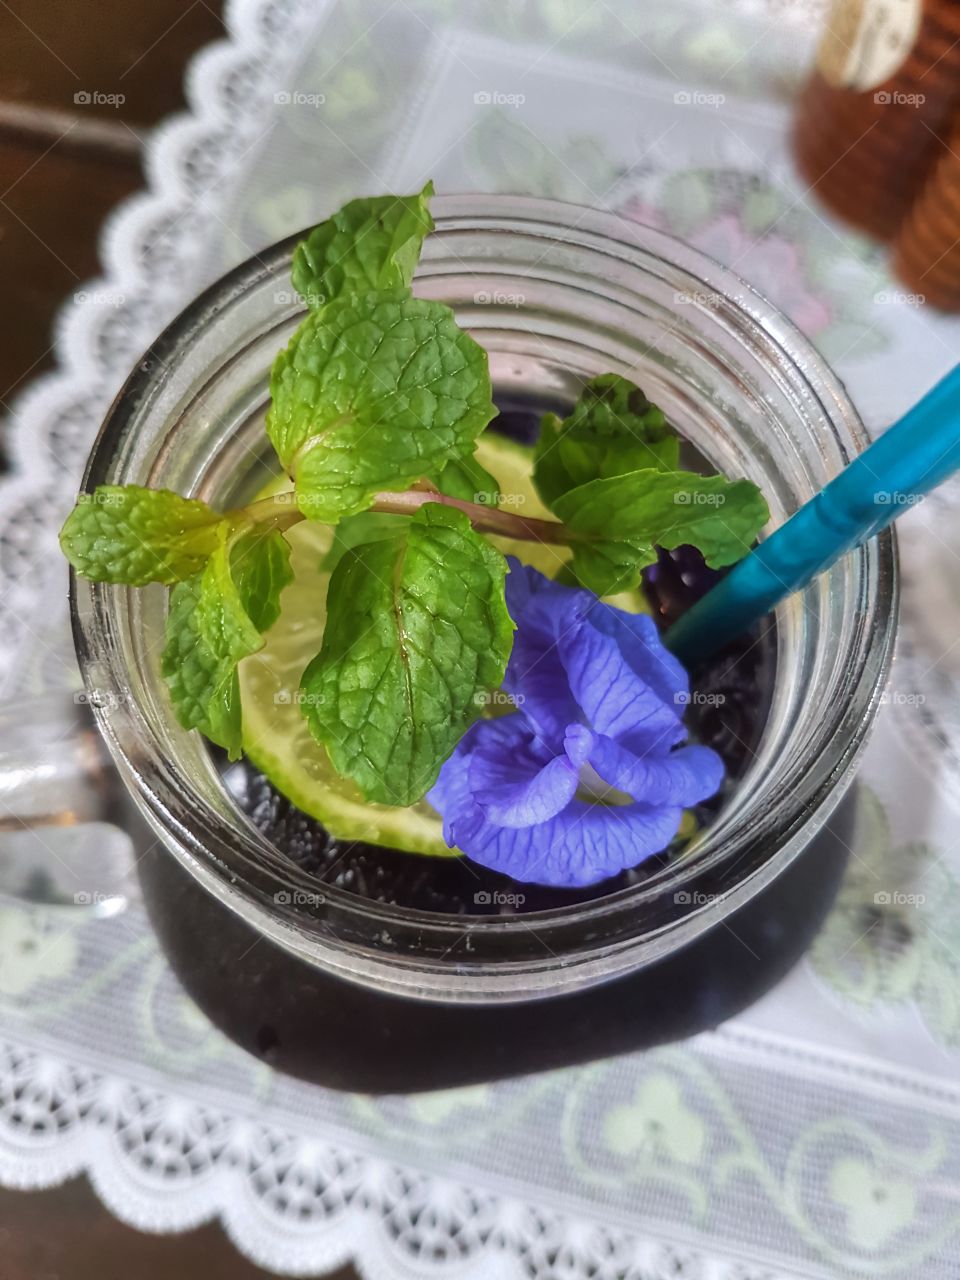 butterfly pea lemonade with fresh mint and flower